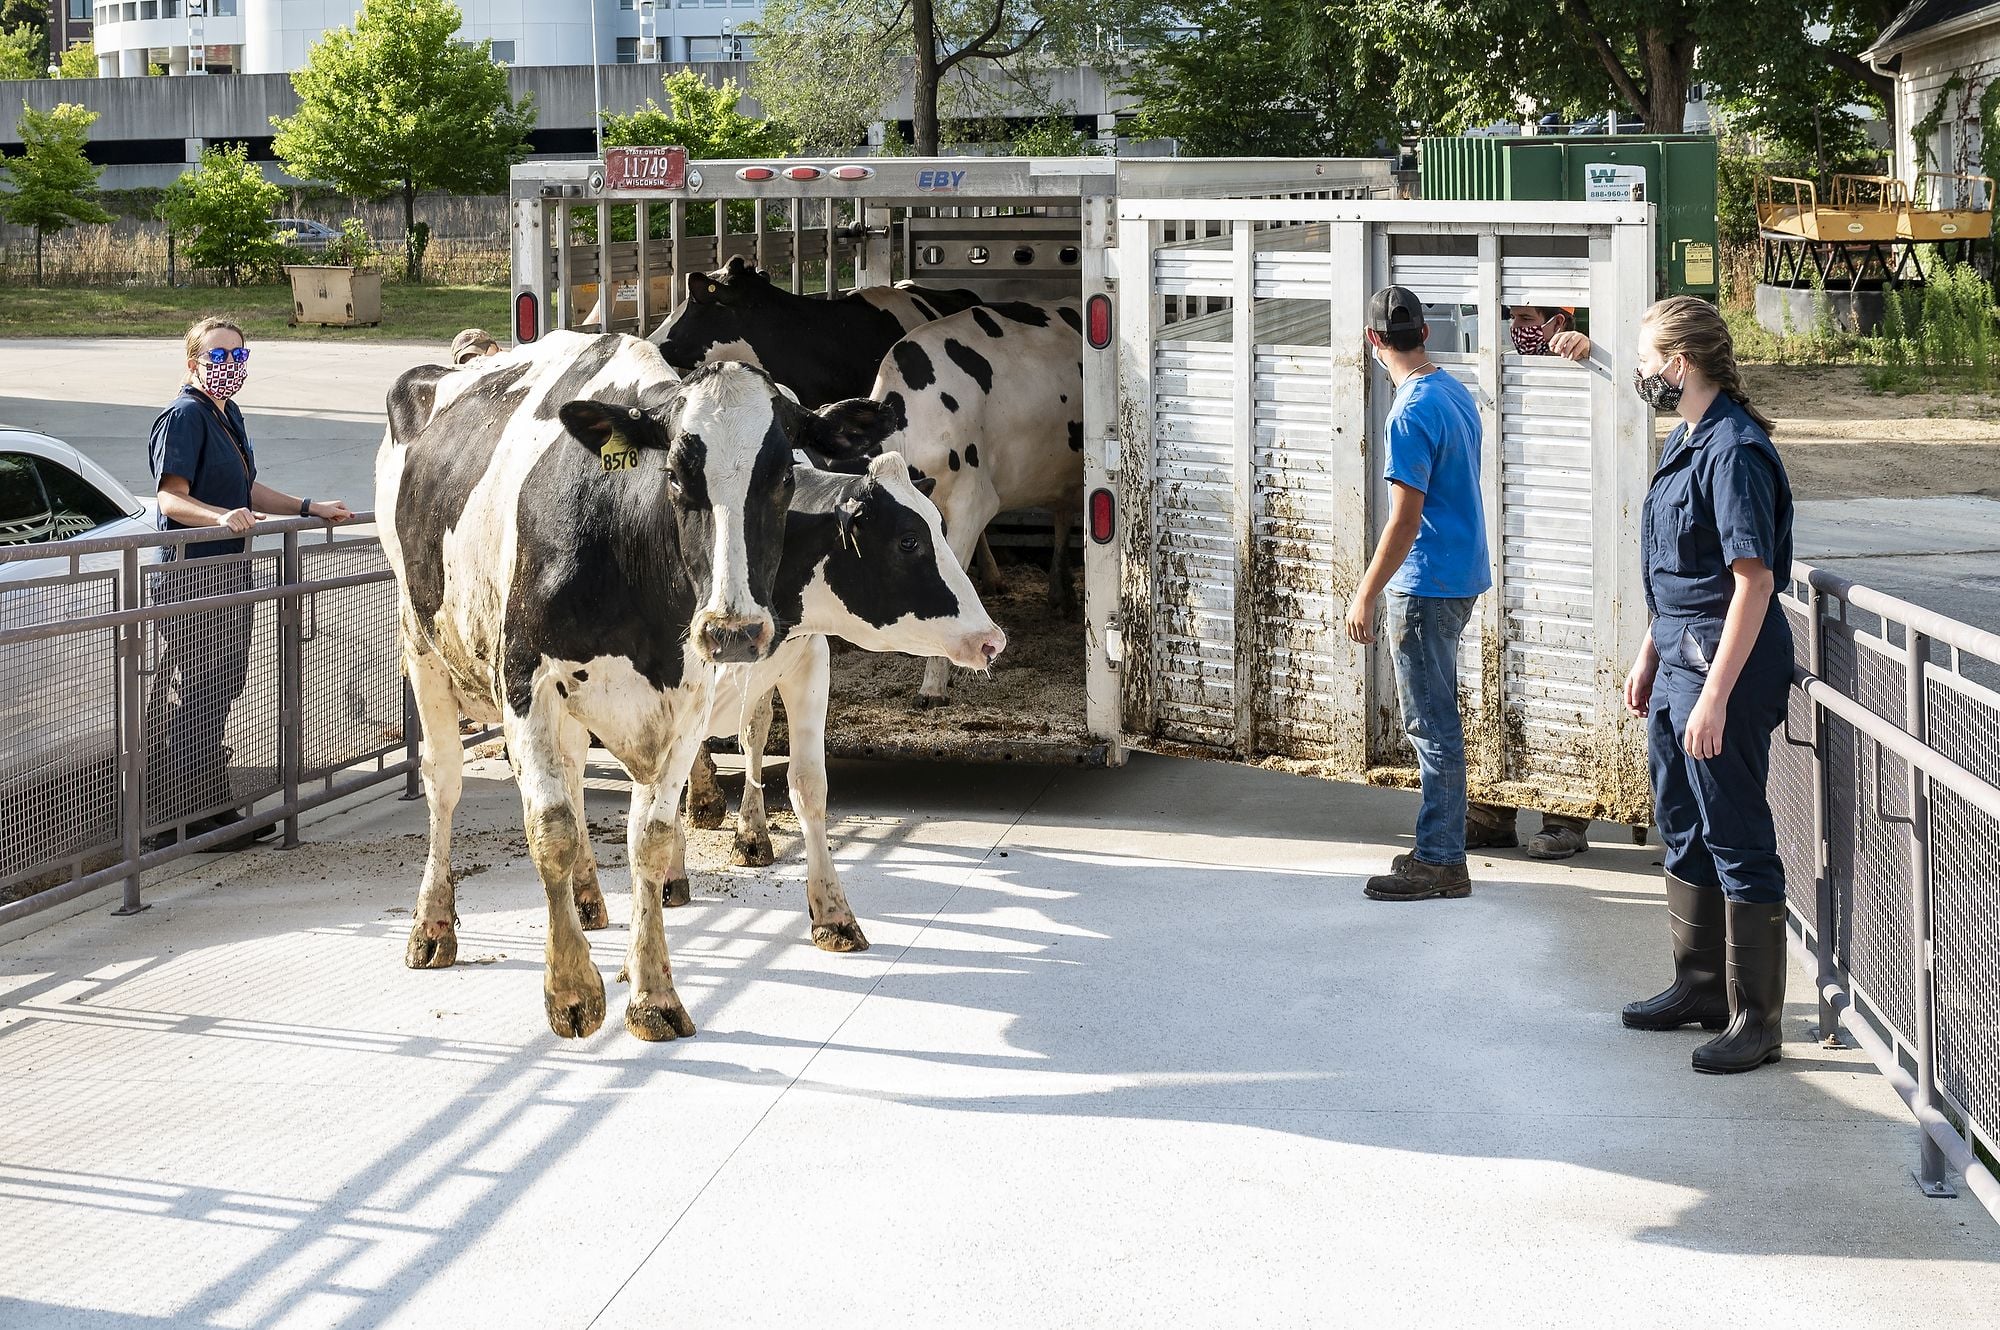 The image shows a livestock trailer with several cows inside. A group of people, presumably handlers or workers, are standing nearby observing the cows as they exit the trailer. The surroundings include a building, trees, and other infrastructure.